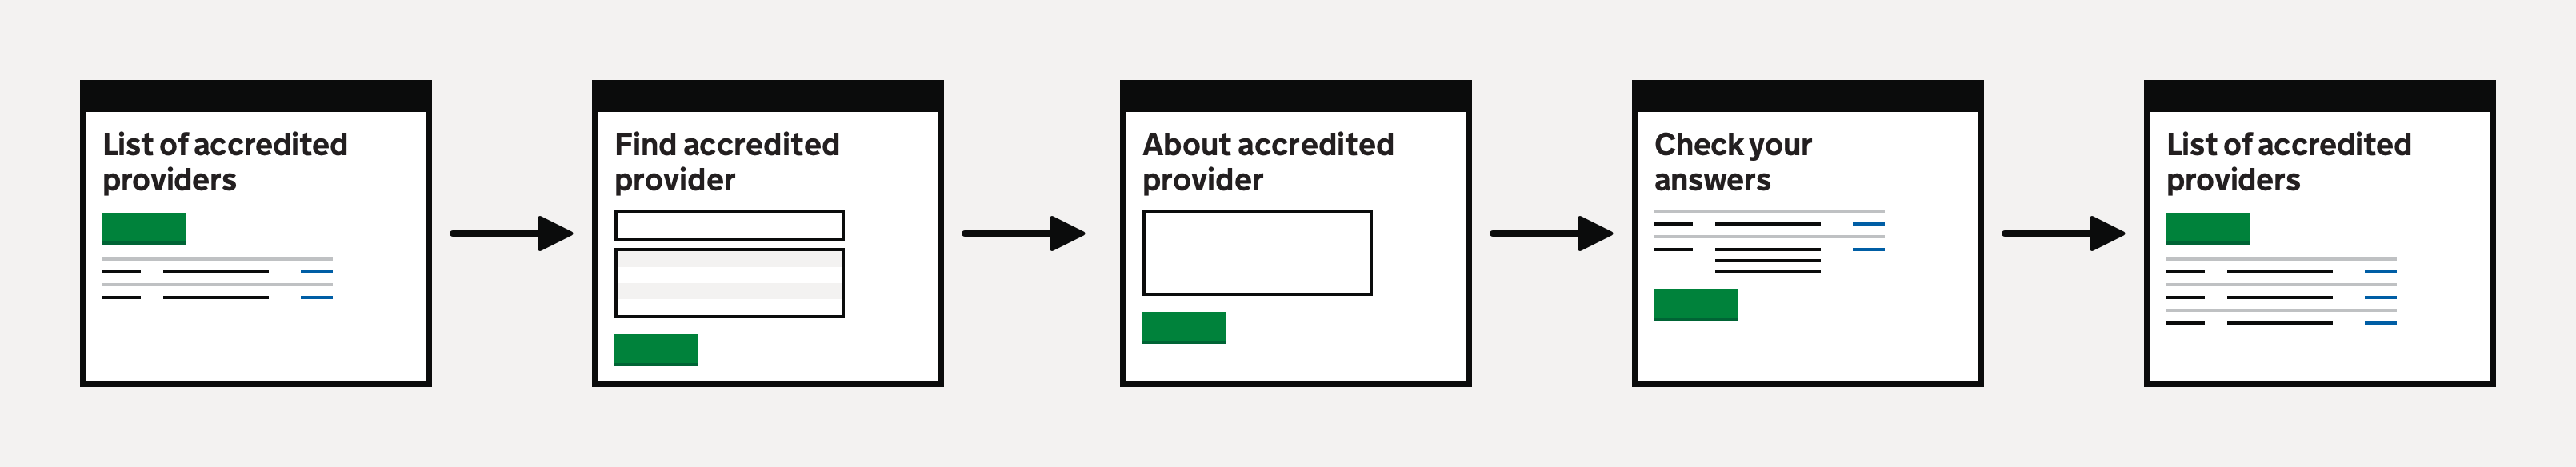 Add accredited provider flow